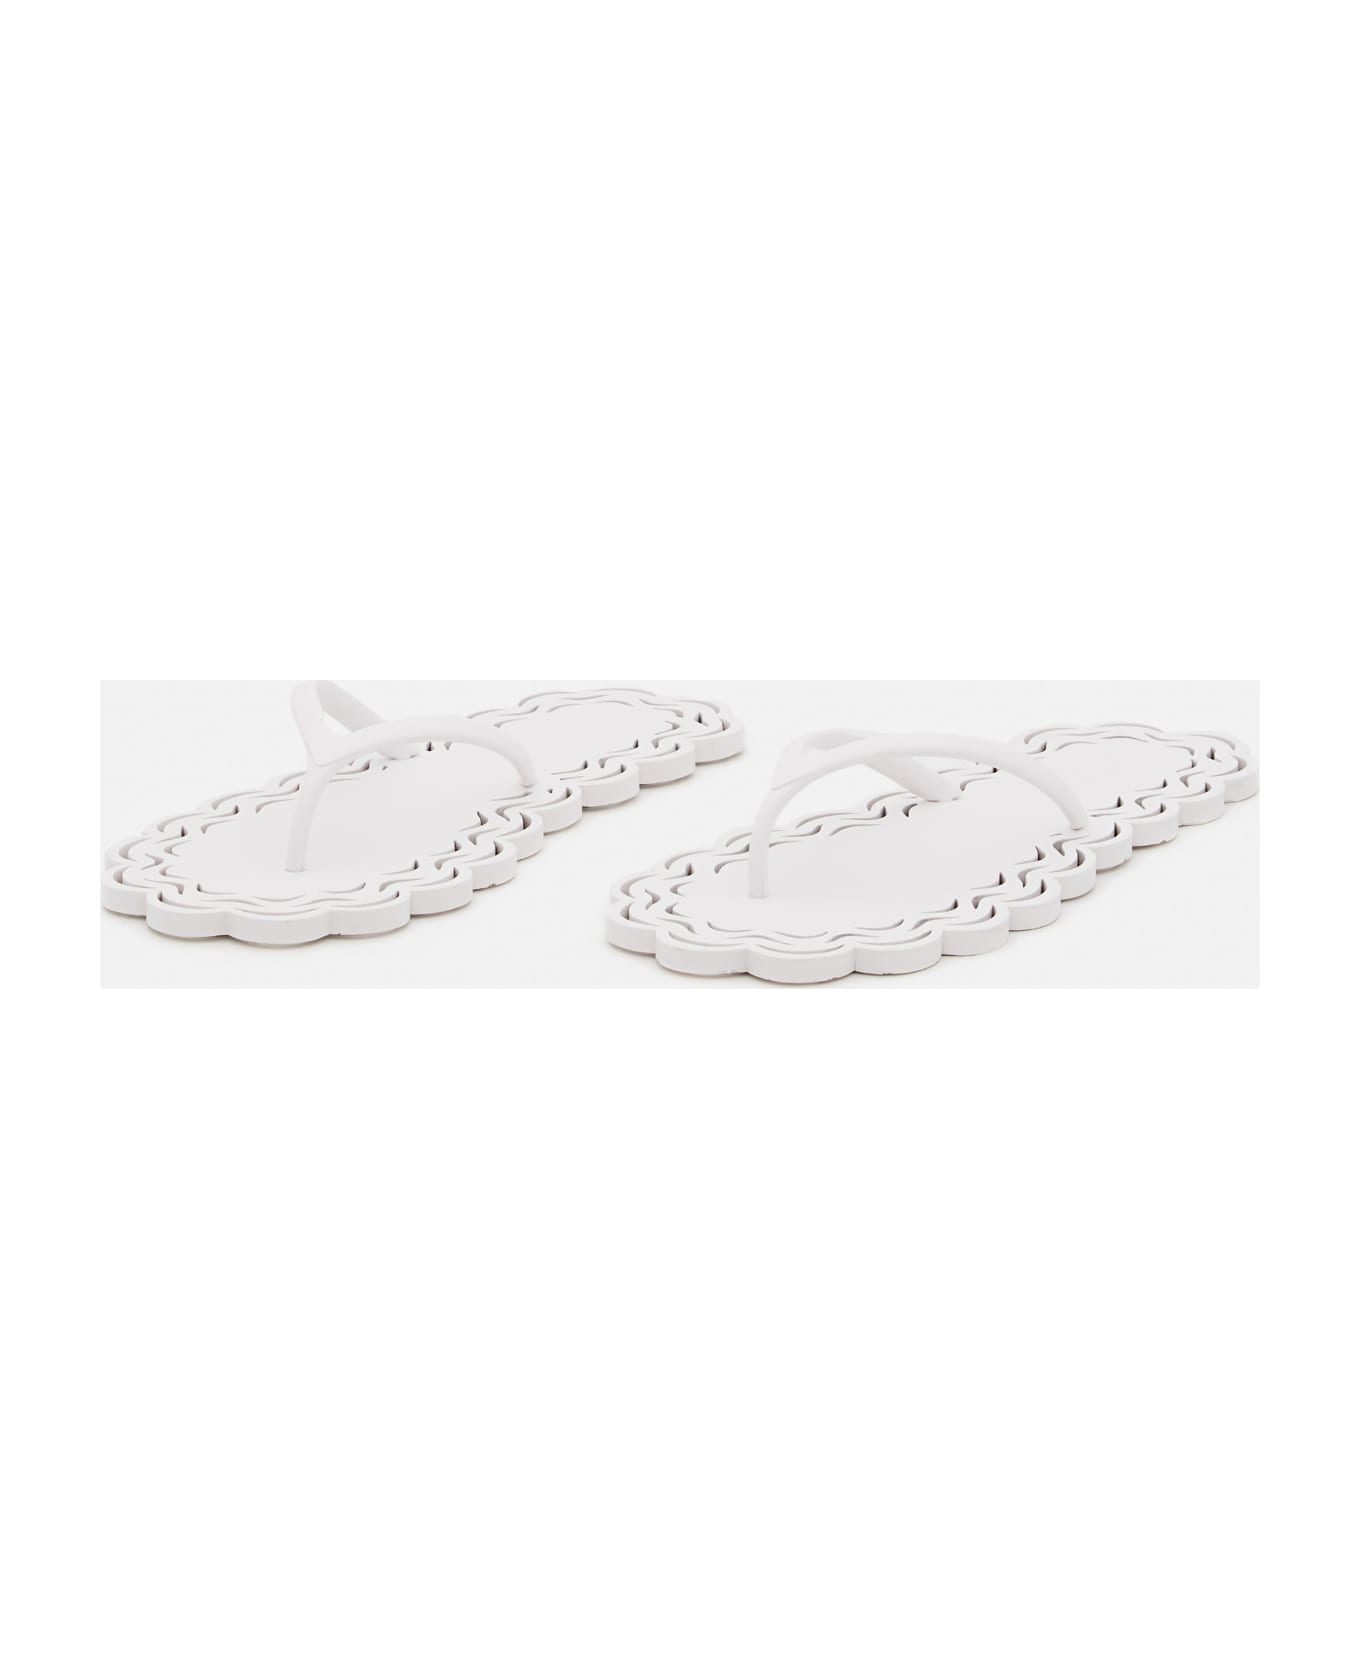 Carlotha Ray Laser-cut Recycled Rubber Flip Flops - White